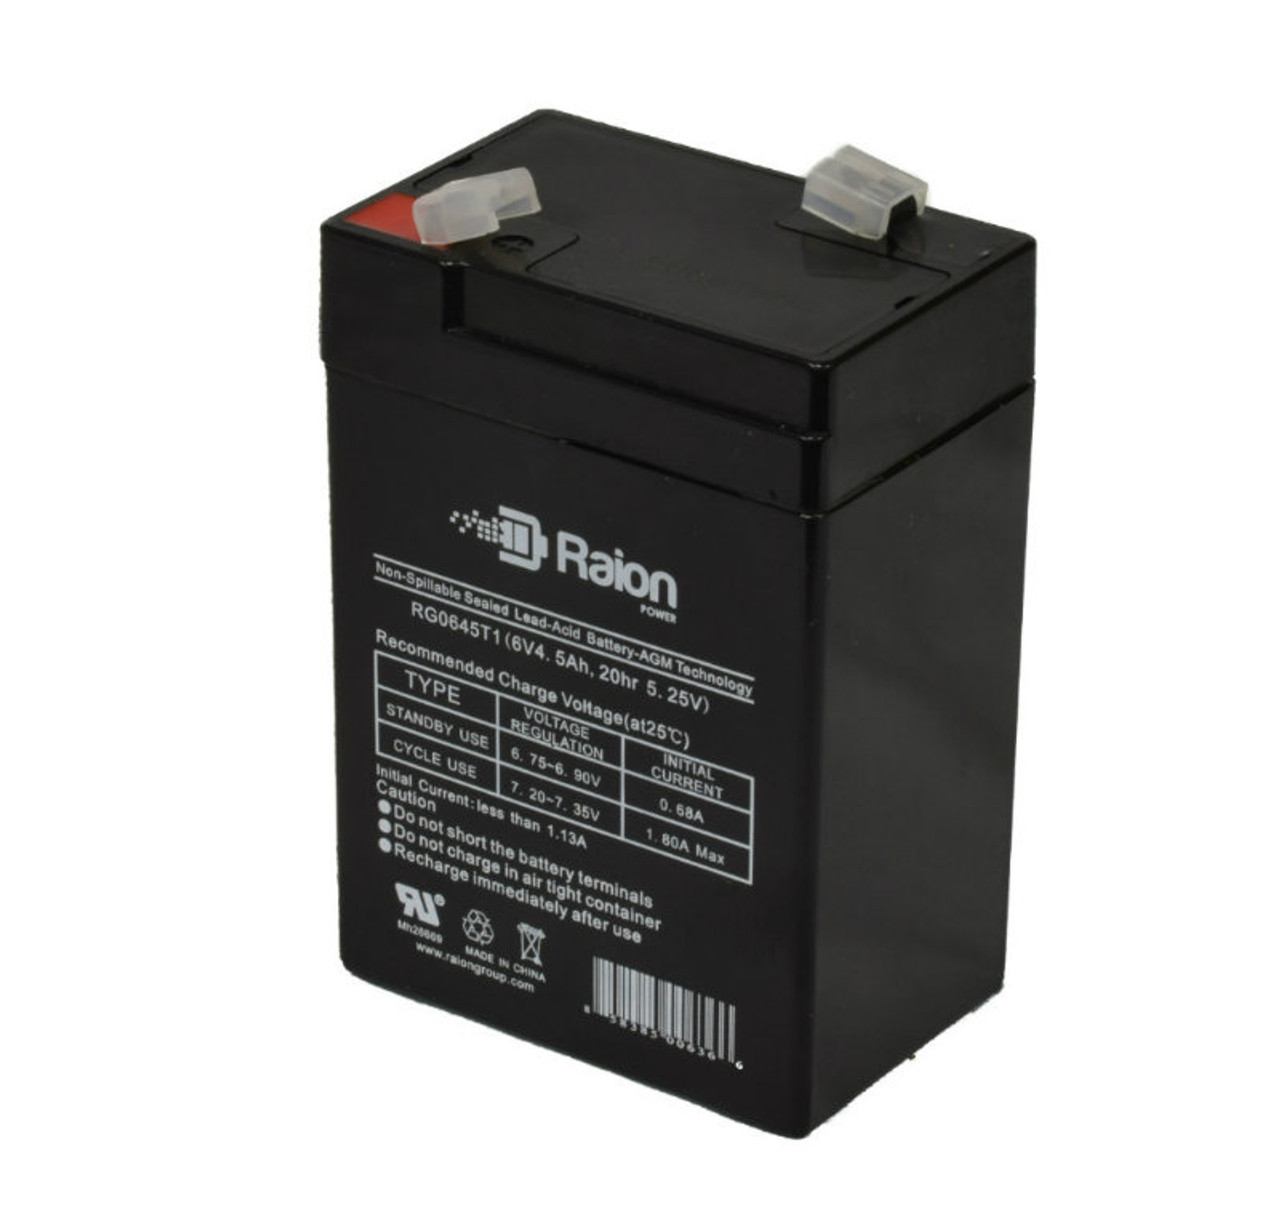 Raion Power RG0645T1 6V 4.5Ah Replacement Battery Cartridge for Edwards 1660